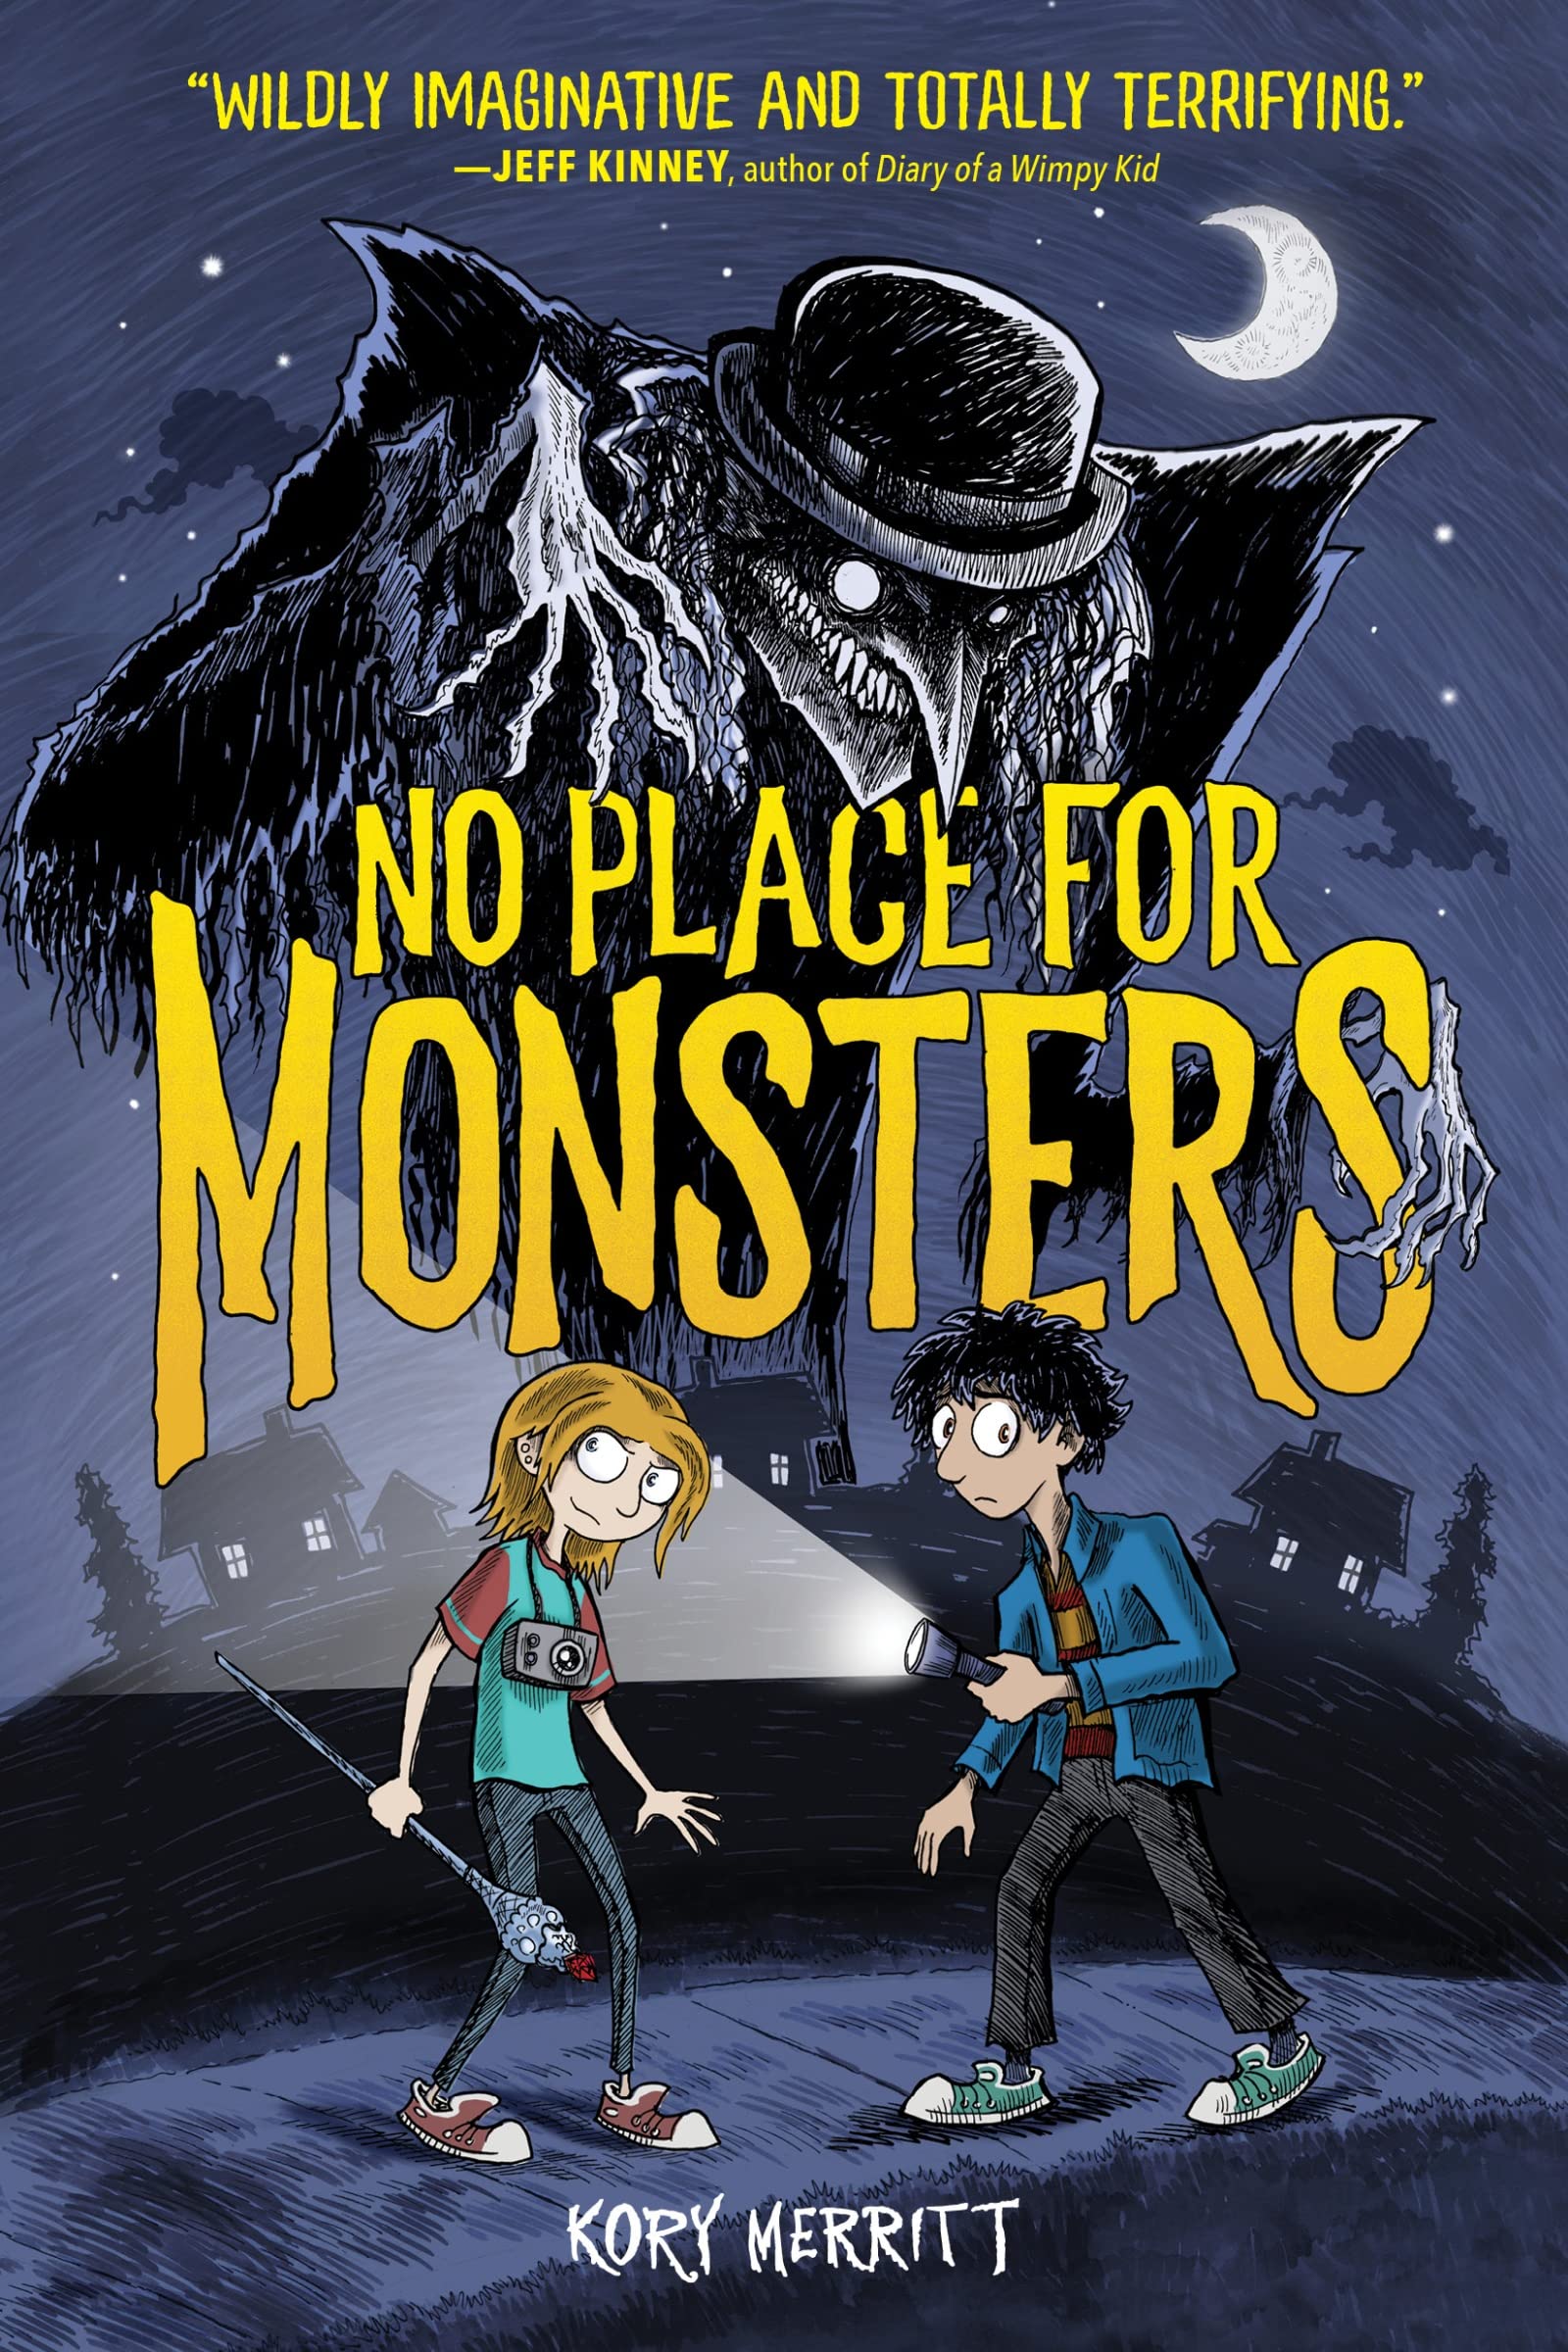 Cover of No Place for Monsters, featuring a boy and a girl with a flashlight, and a dark scary figure rising up behind them